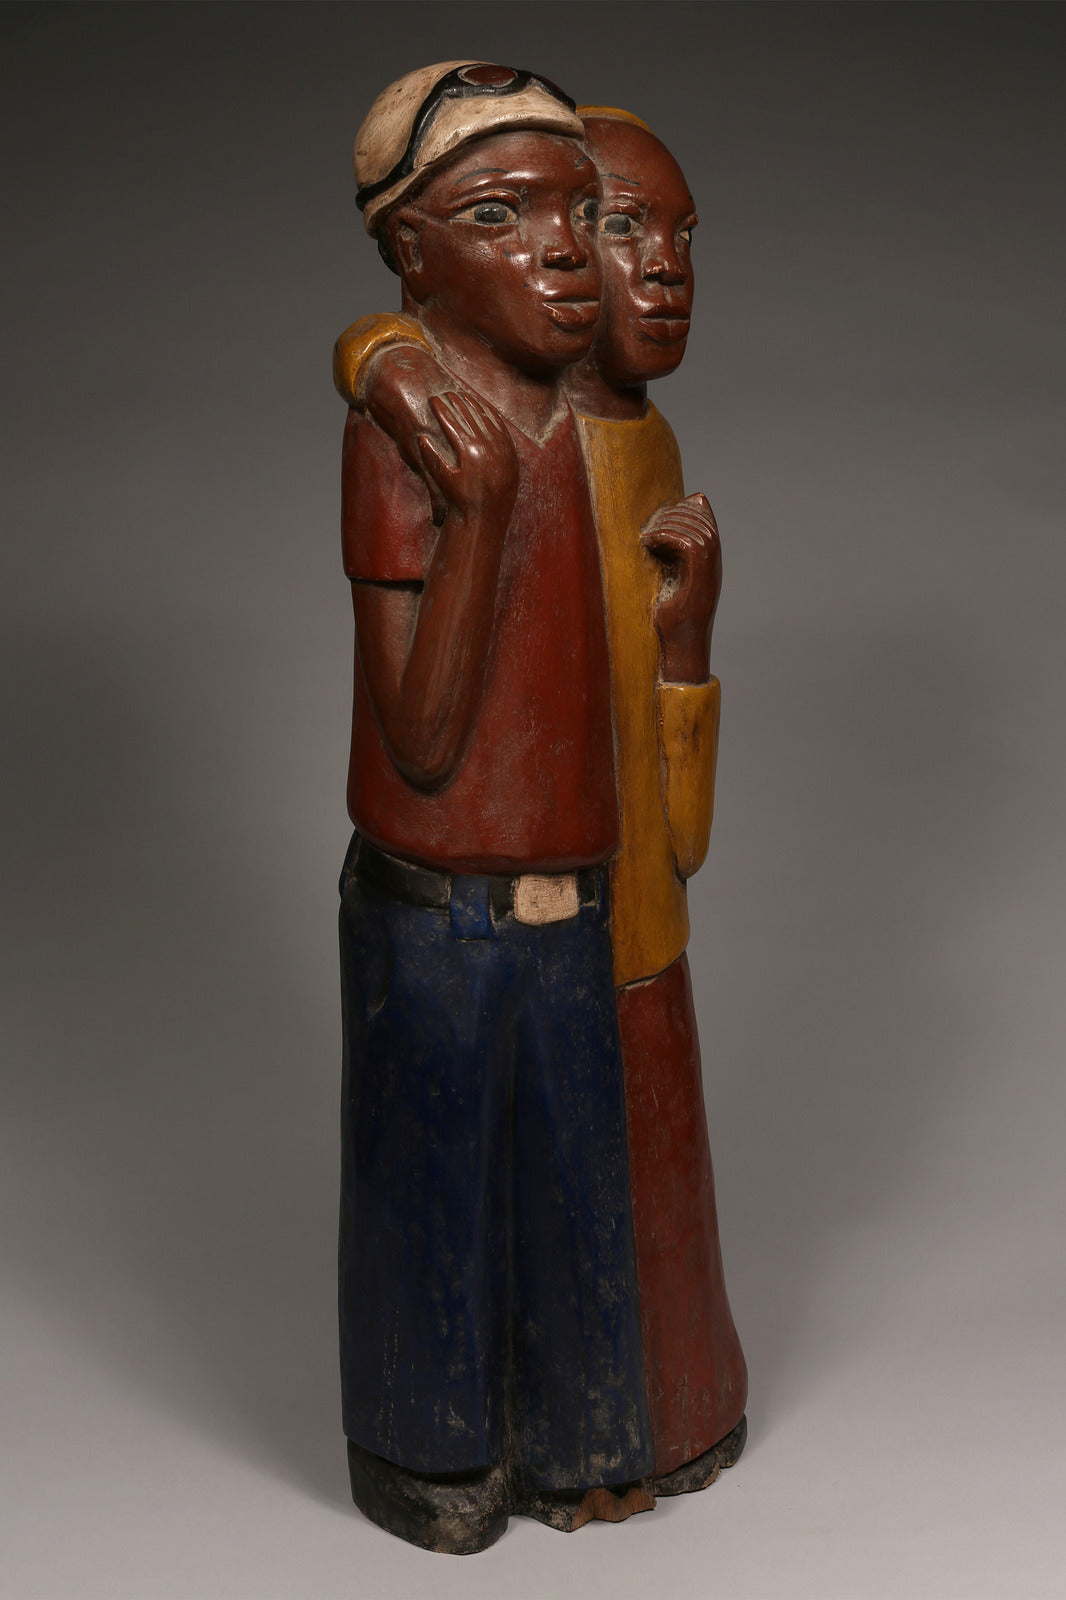 Handcrafted Sculptures - African Art - Home Decor - Wood - Statue - Figurine - Friendship - Painted